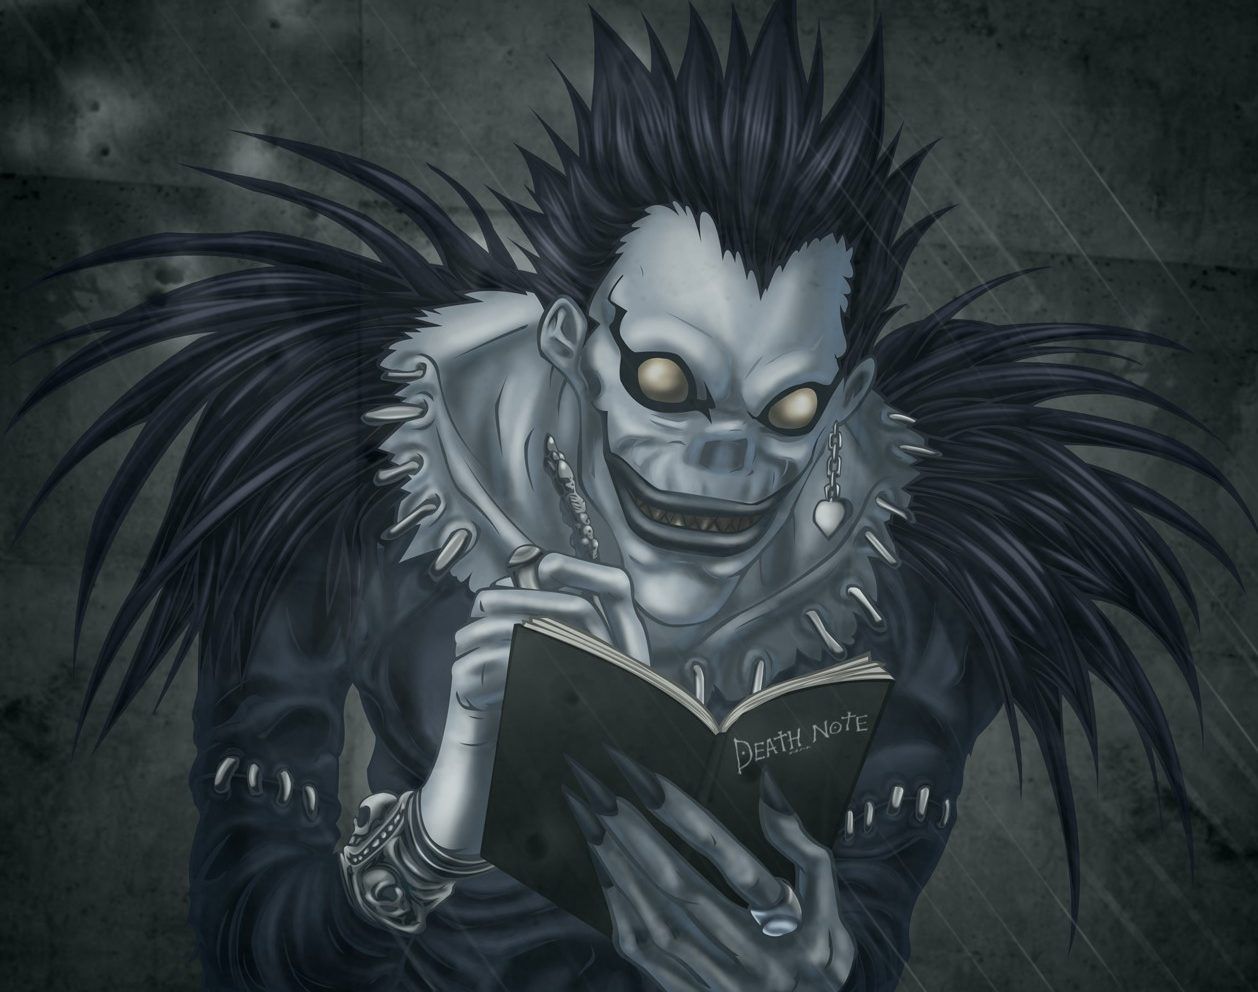 25 Secrets The Creators Of Death Note Want To Bury